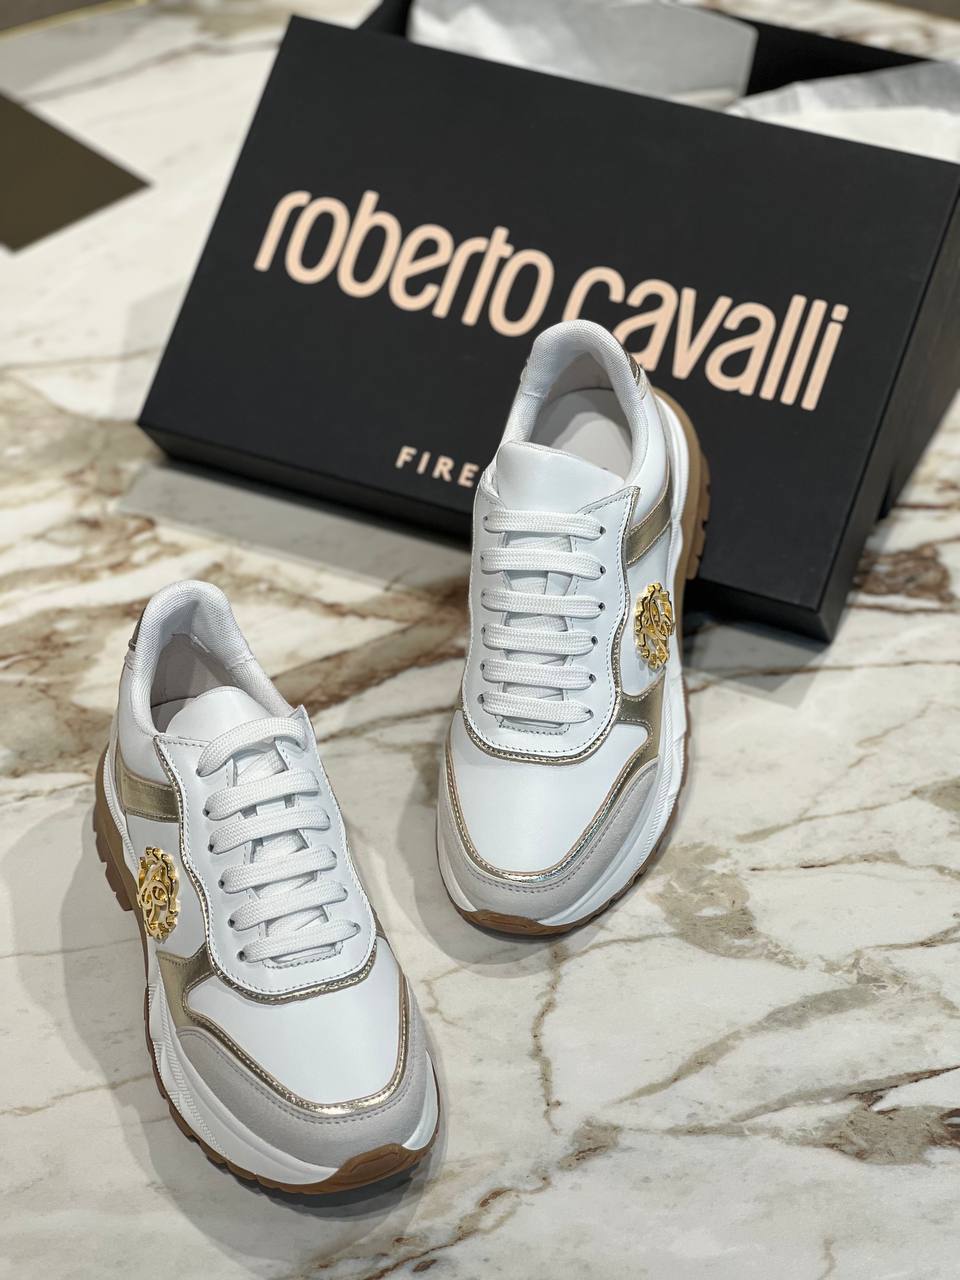 Roberto Cavalli Outlets 4704